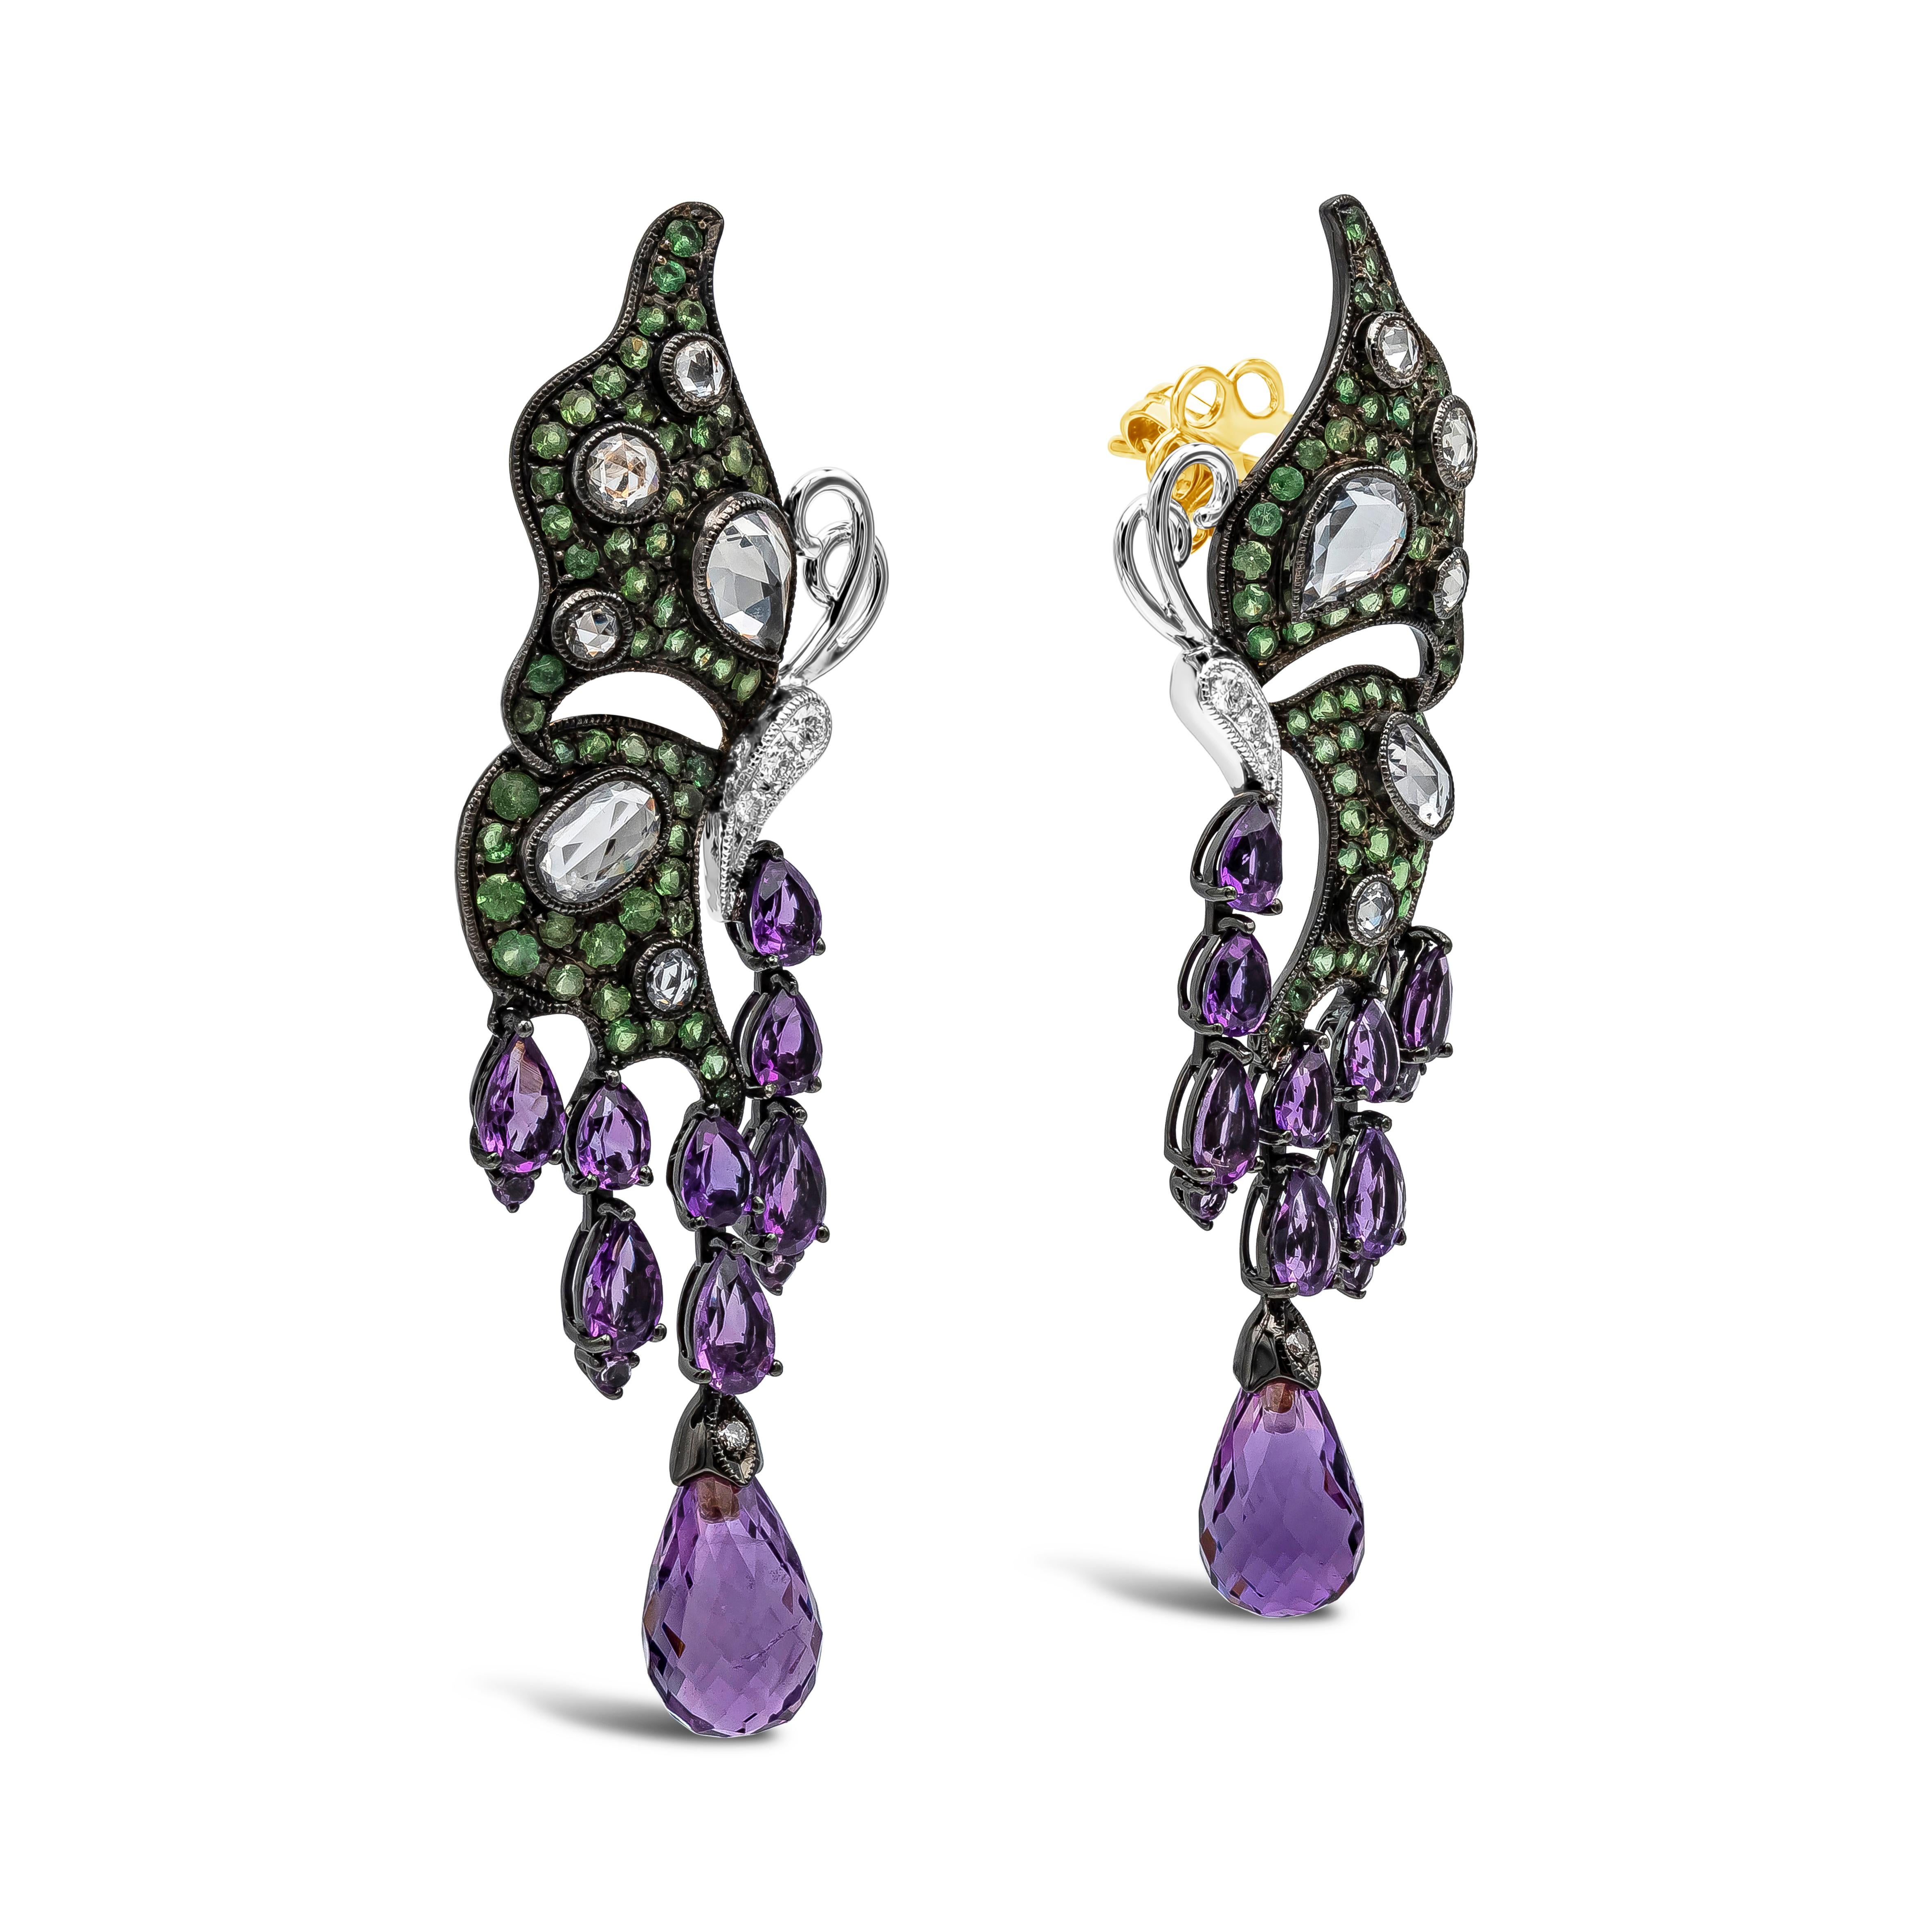 A beautiful and intricately-designed pair of dangle earrings showcasing an 18k gold butterfly design, set with color-rich tsavorites weighing 1.50 carats total and rose cut diamonds/sapphires . Hanging from the butterfly are pear and briolette shape